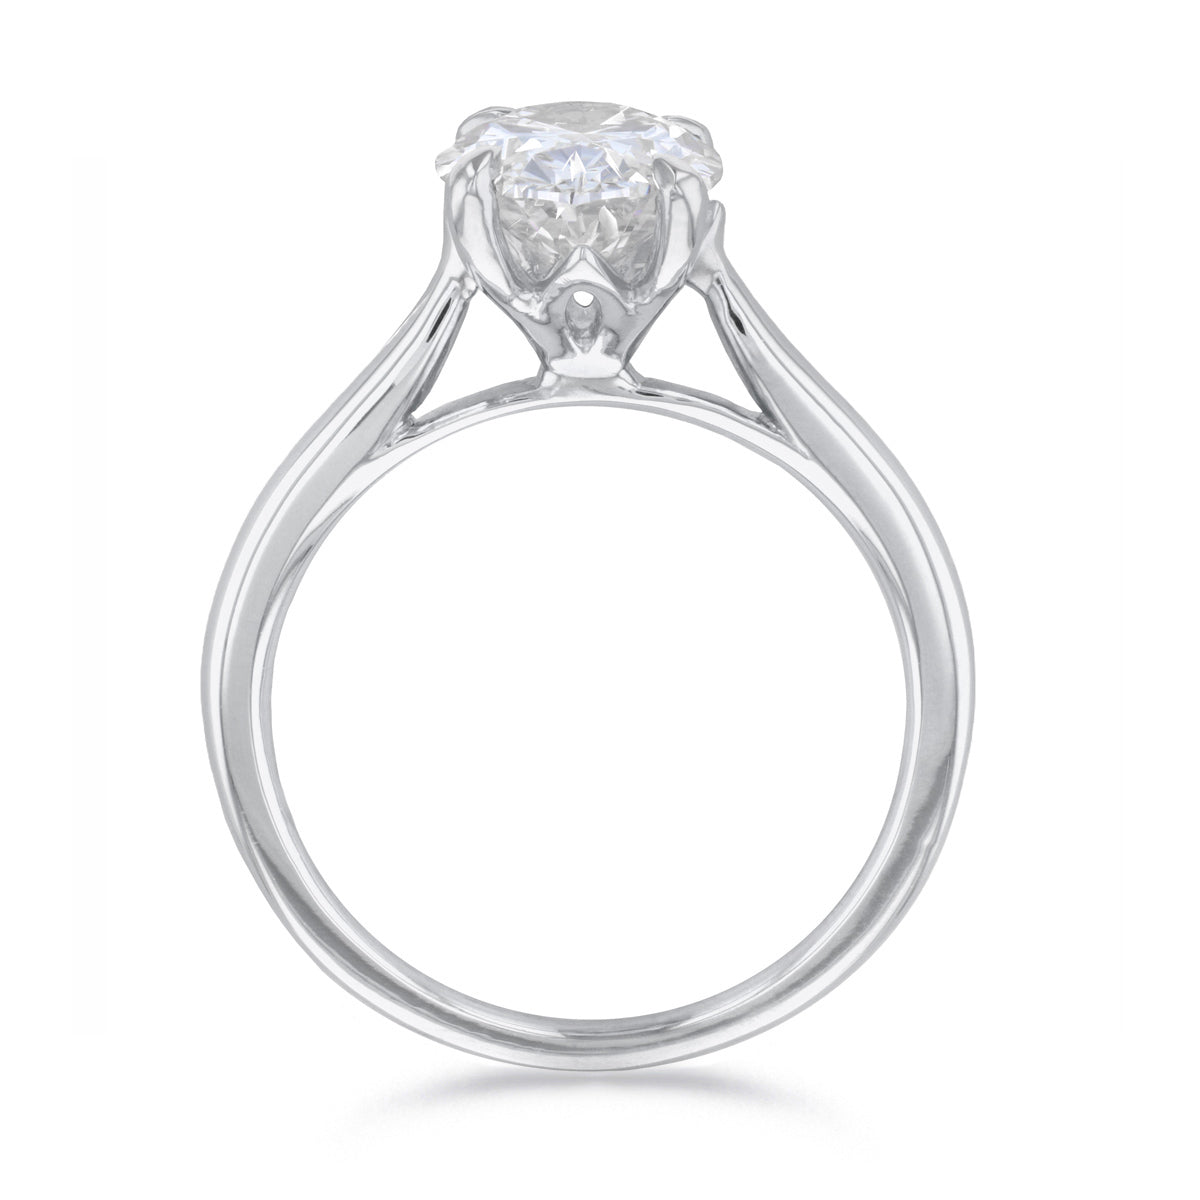 1.00ct Poppy Plain Oval Cut Diamond Solitaire Engagement Ring | 18ct White Gold - C